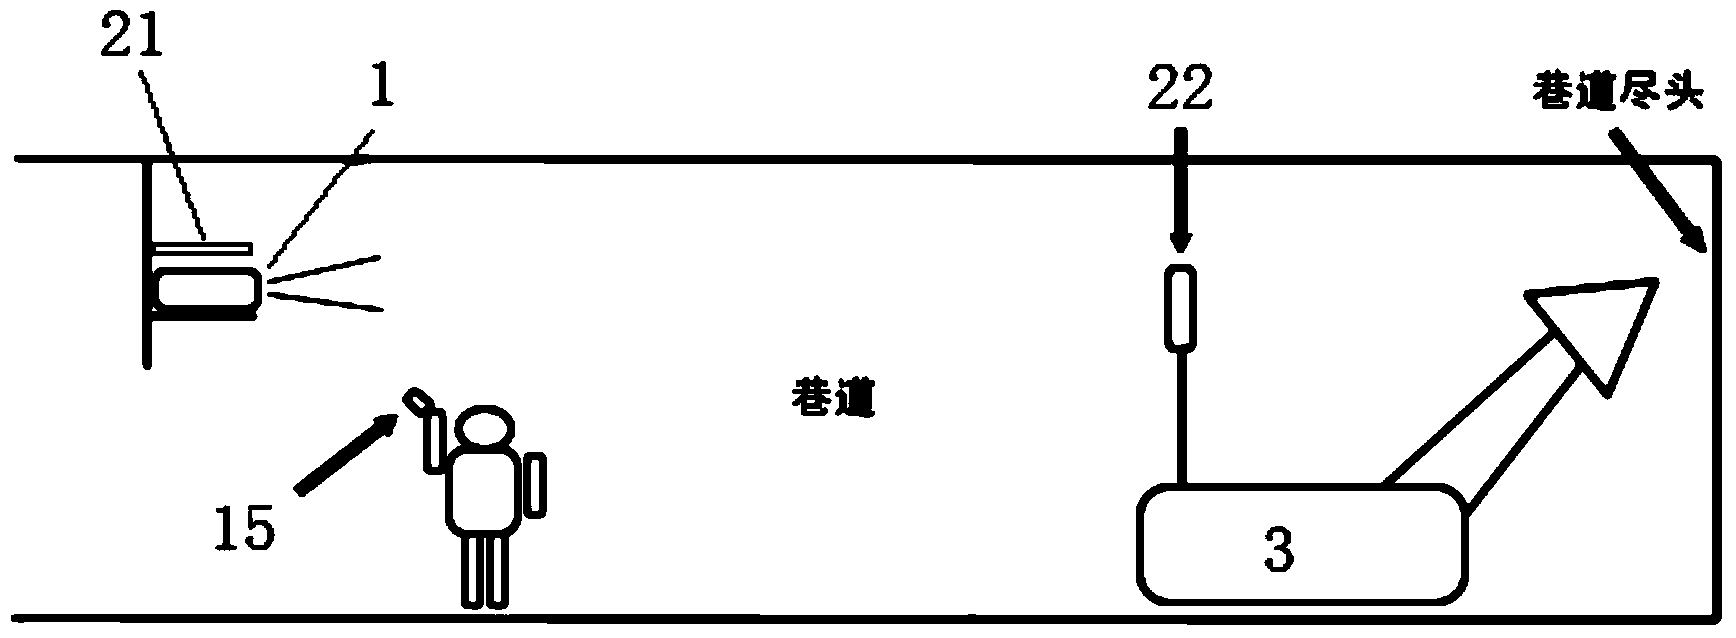 Roadway outline generation device